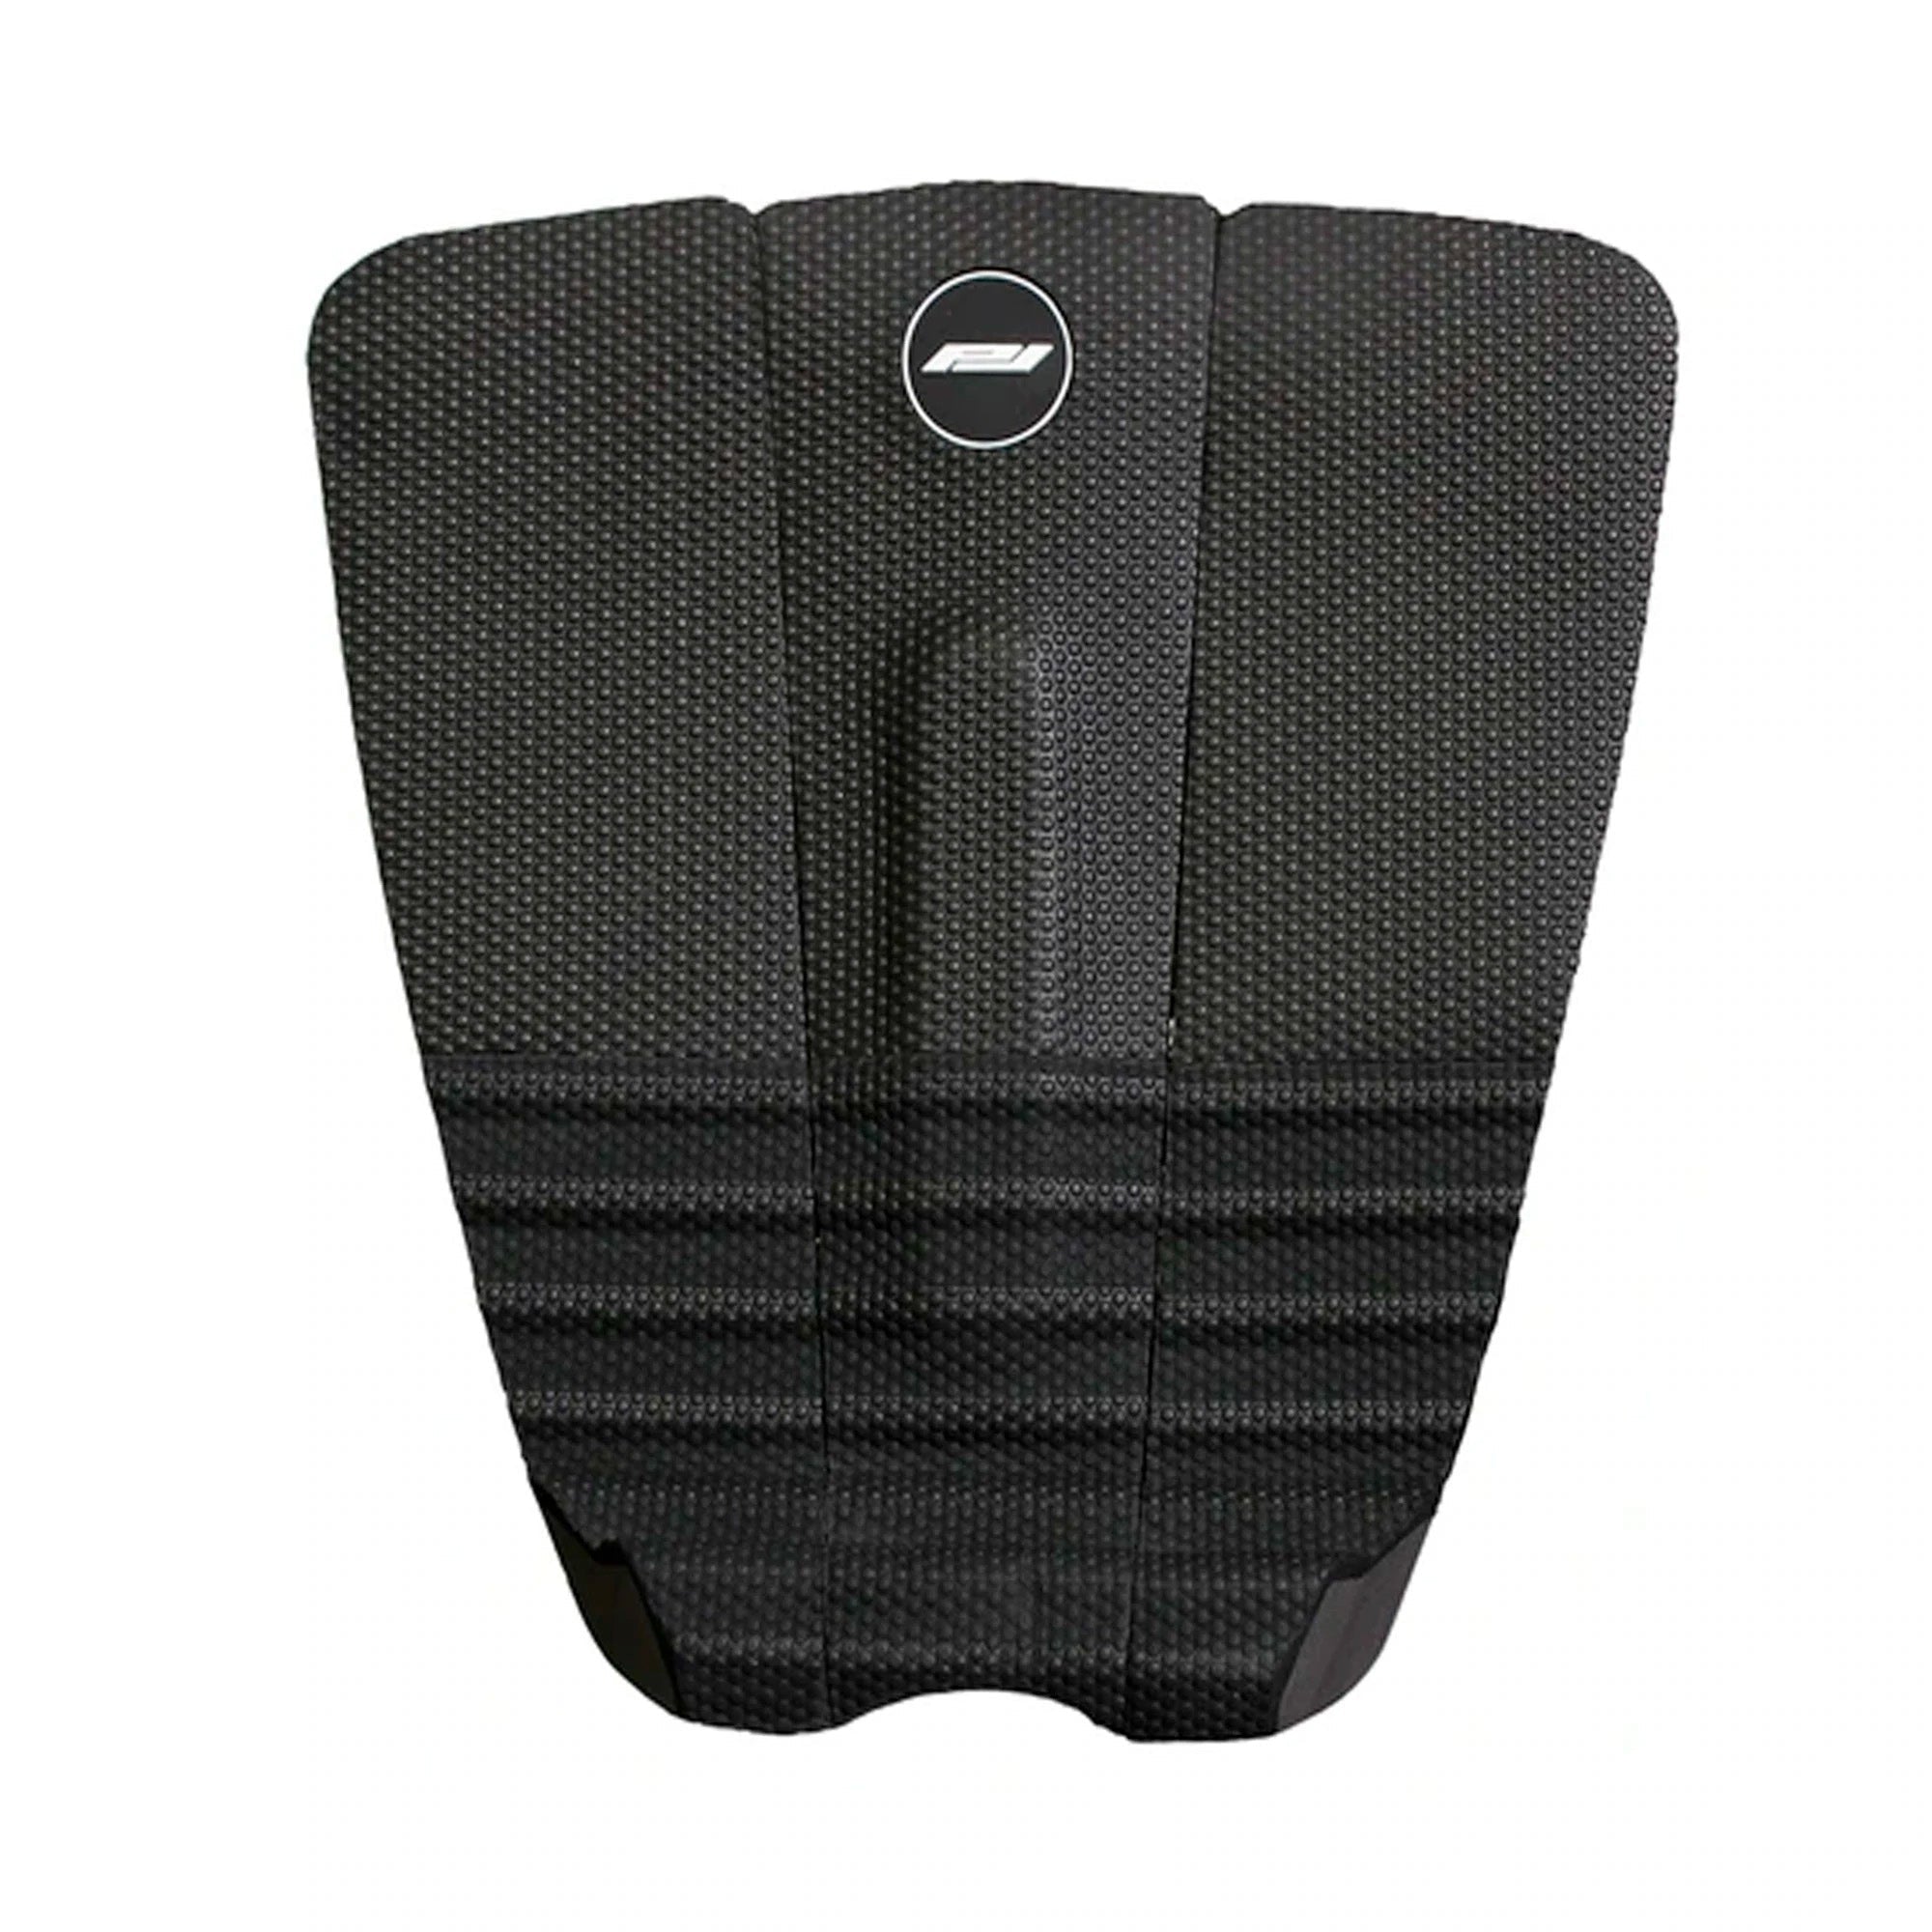 Surfboard Traction Pads